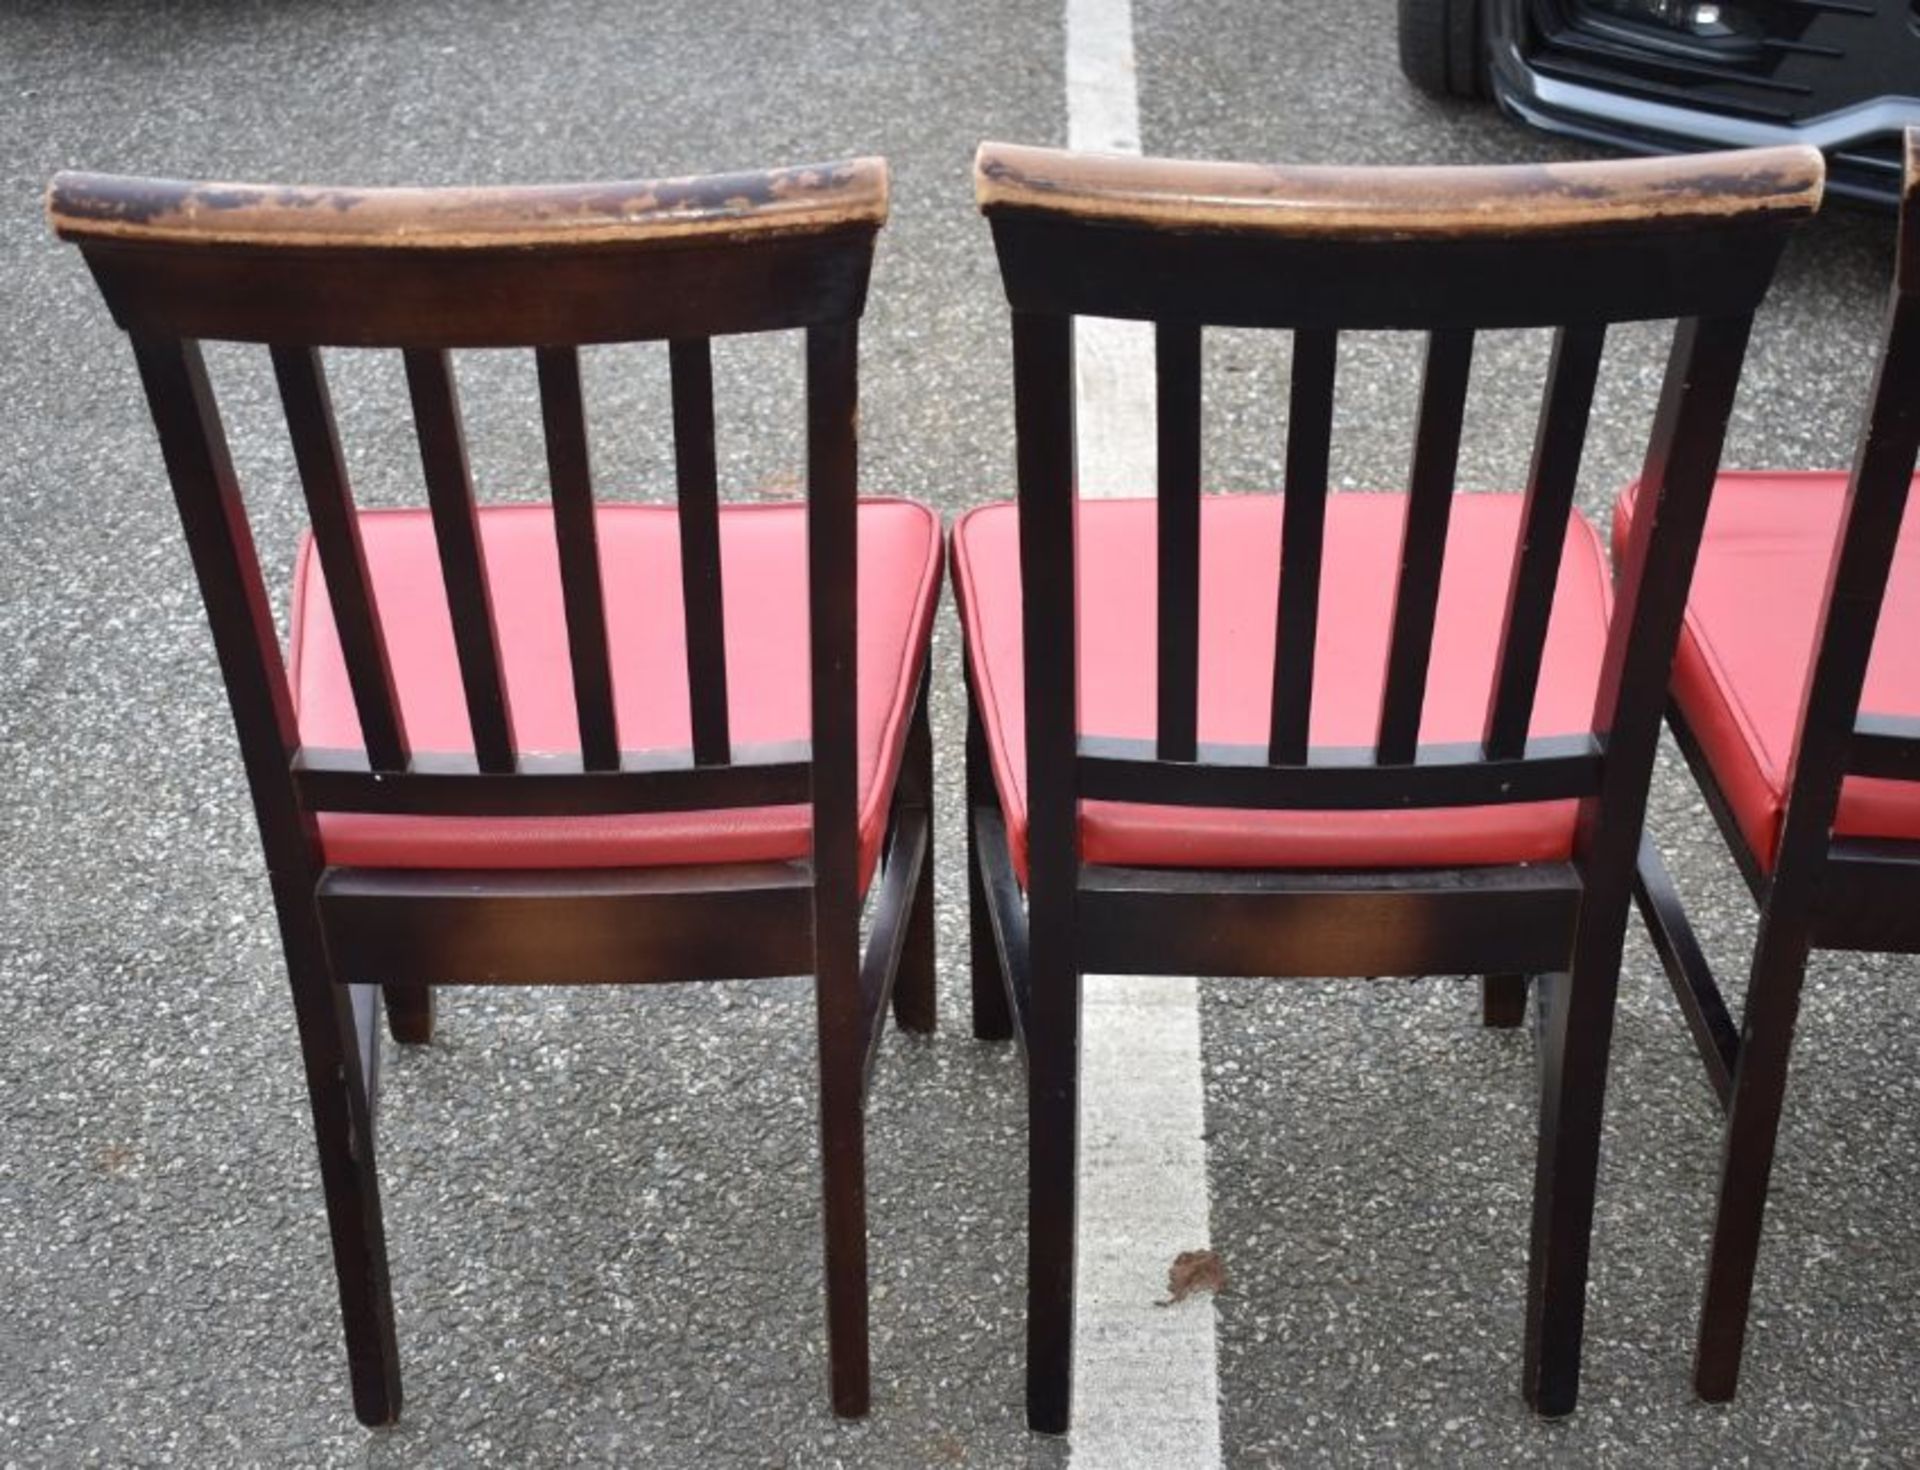 16 x Restaurant Dining Chairs With Dark Stained Wood Finish and Red Leather Seat Pads - Recently - Image 7 of 7